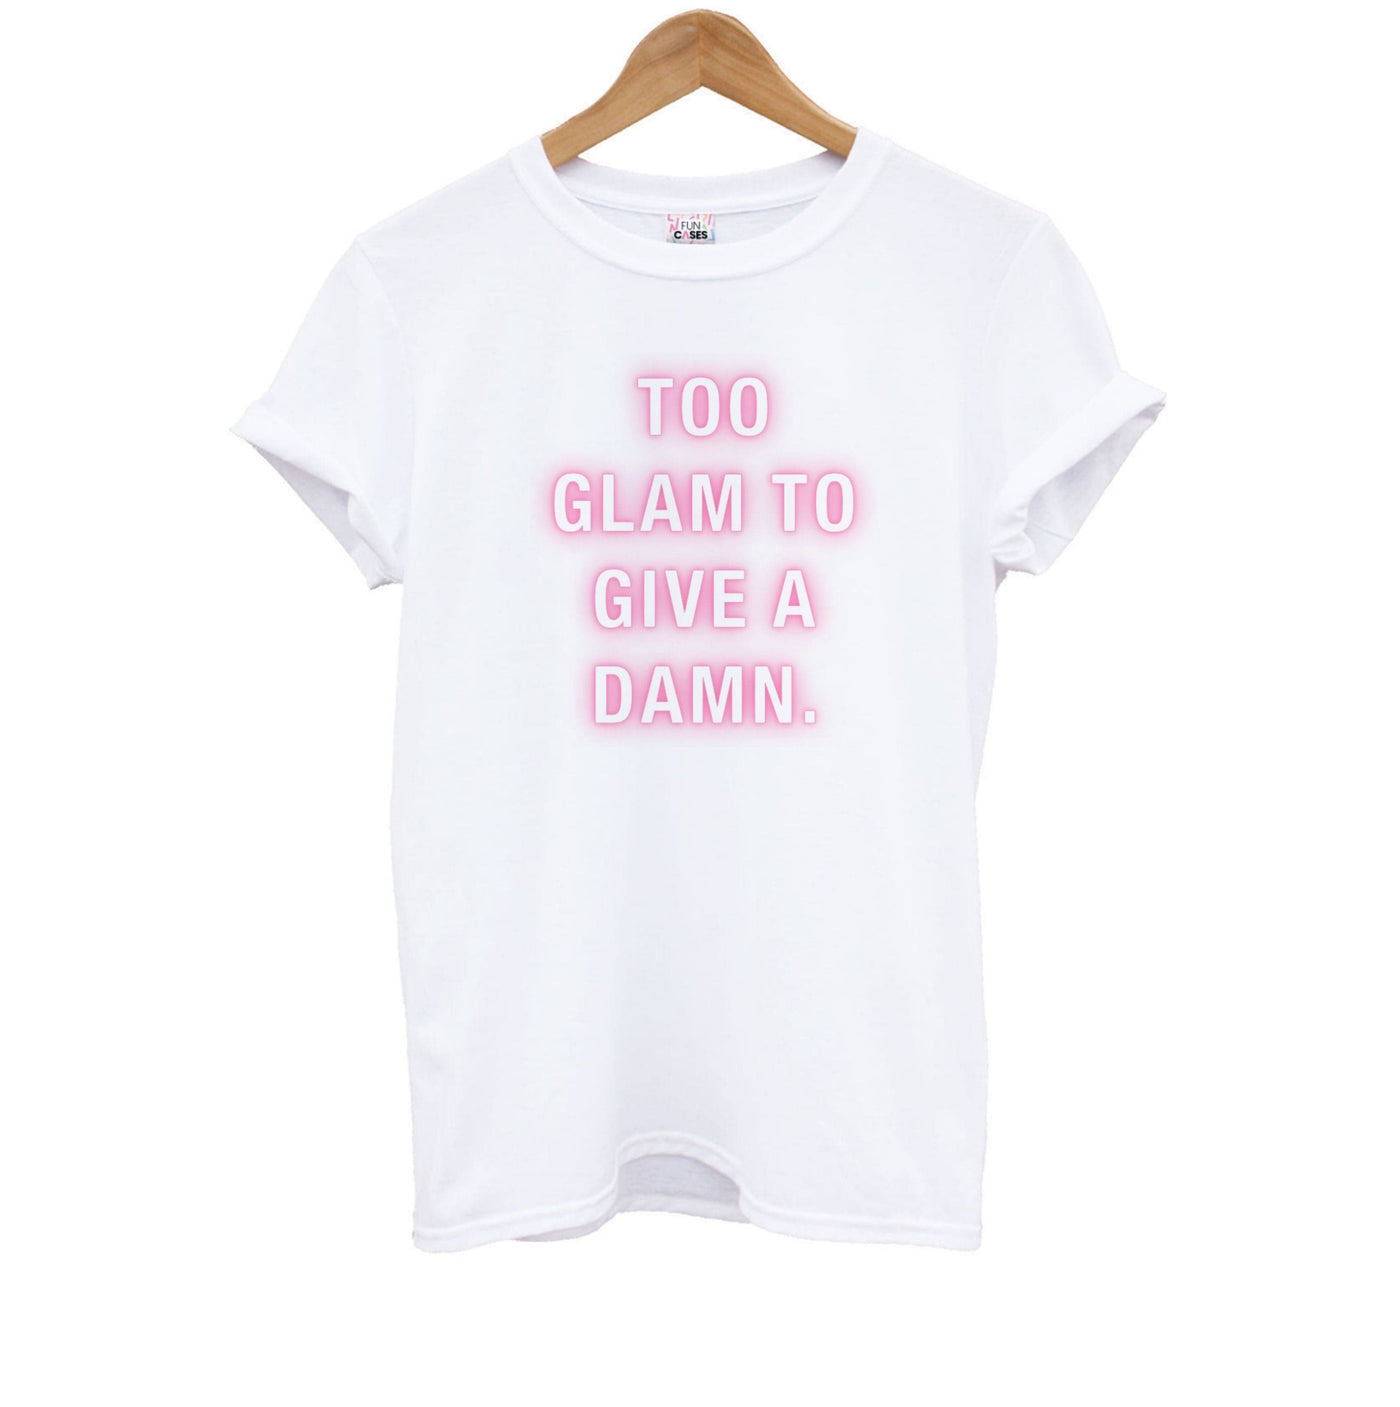 Too Glam To Give A Damn Kids T-Shirt